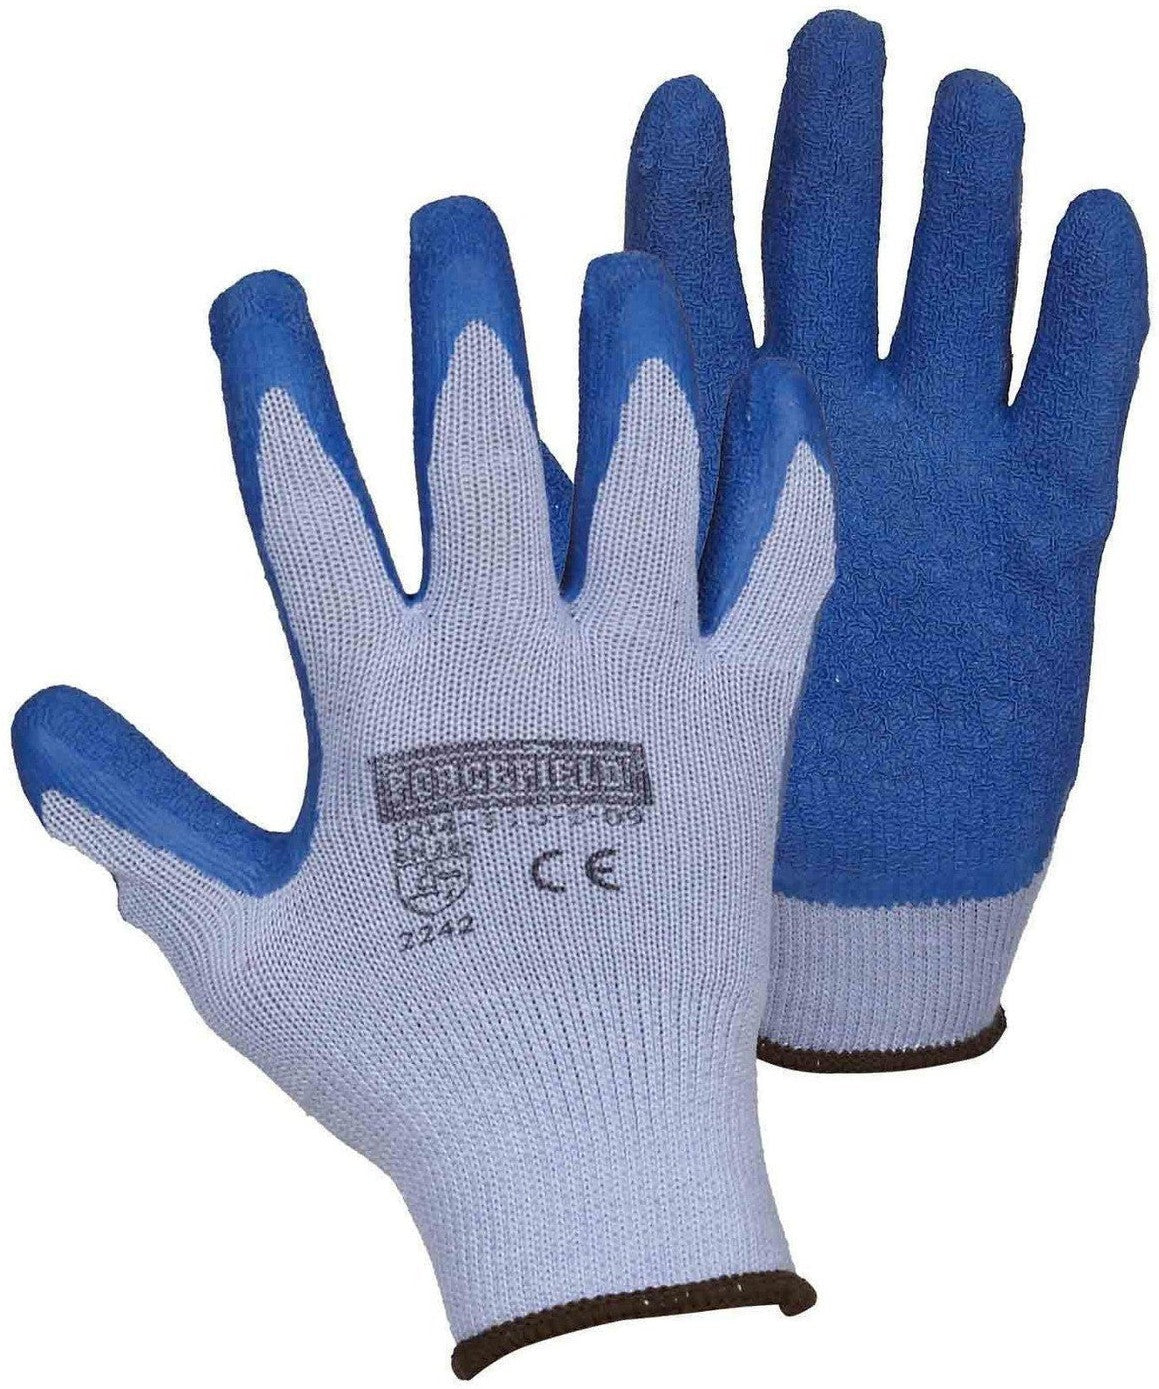 Forcefield - Small Blue latex Coated Work Gloves - 004-310-I-07